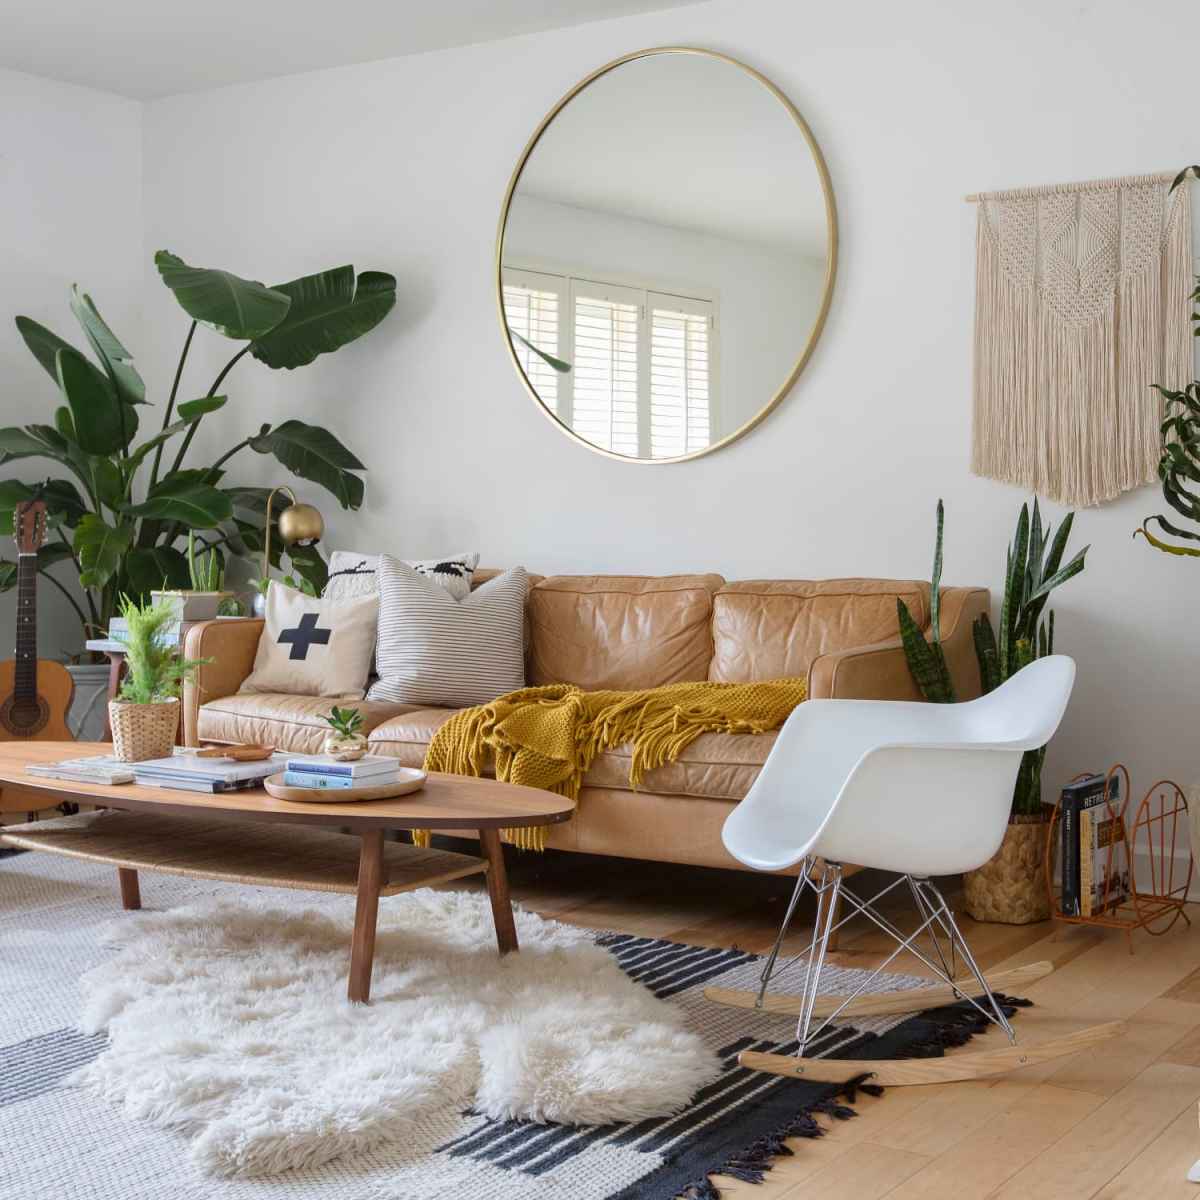 Home Decor 101: 7 Stylish Ways to Elevate Your Interior – Daily Spark